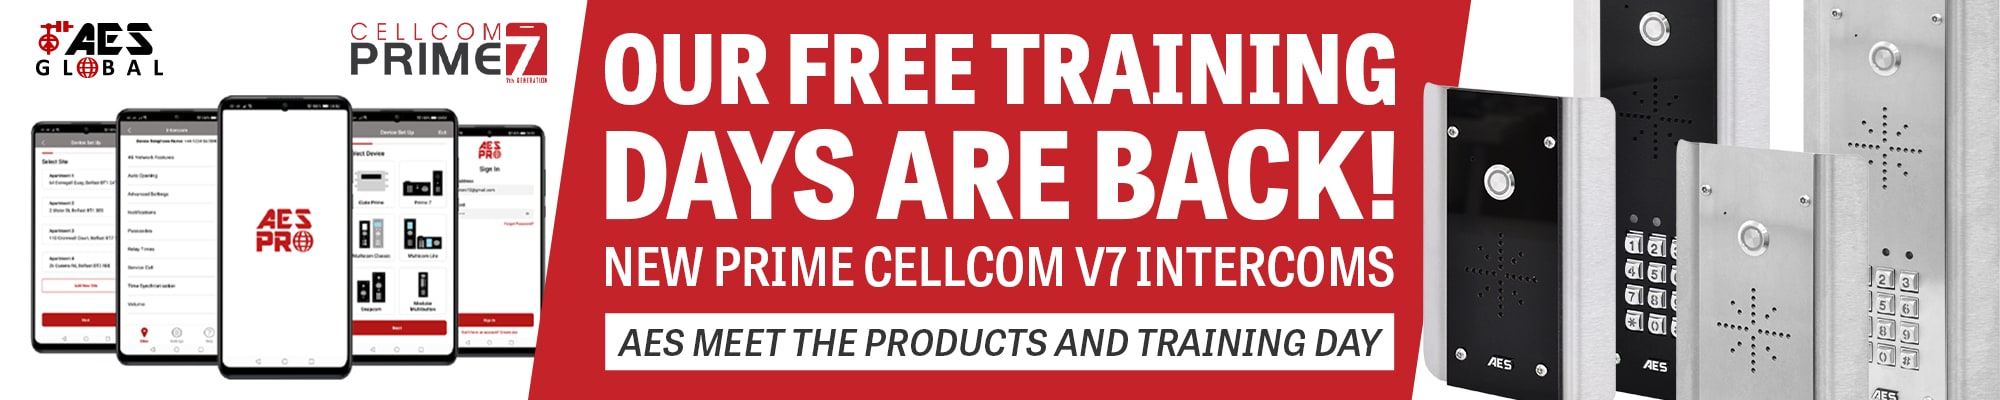 Our FREE Training Days are Back! New AES Cellcom Prime V7 - Meet the Products and Training Day